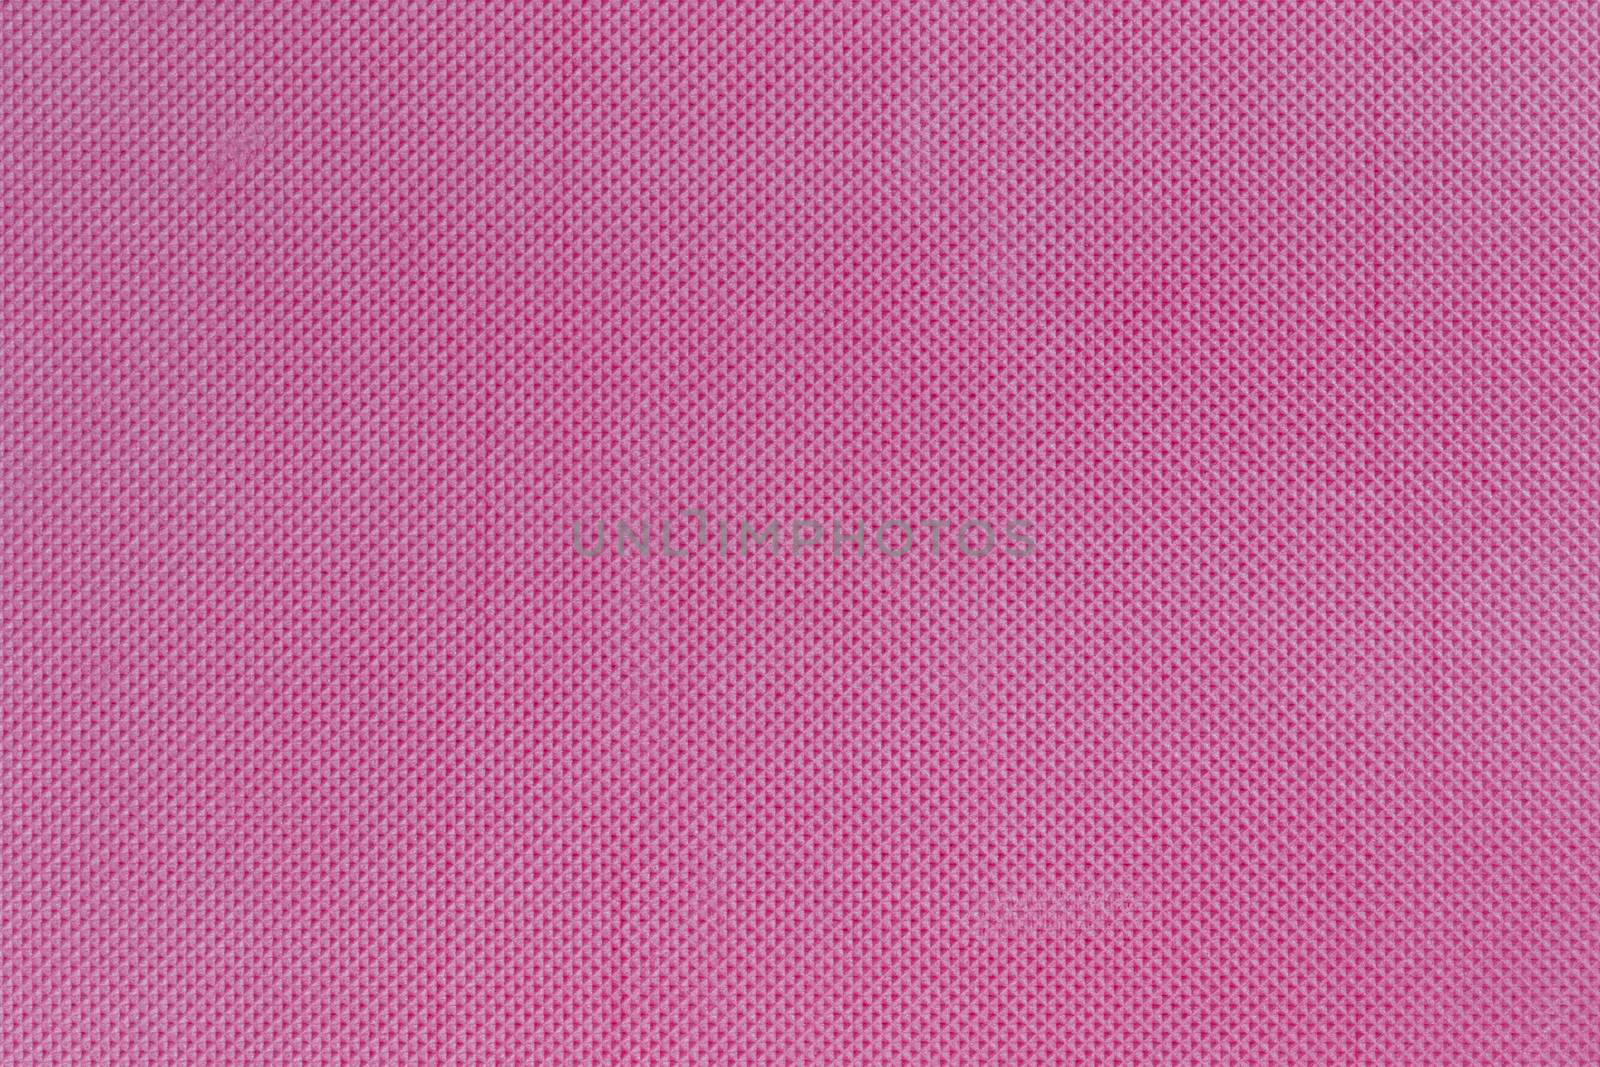 pink sport or yoga foam mat surface flat texture and background by z1b